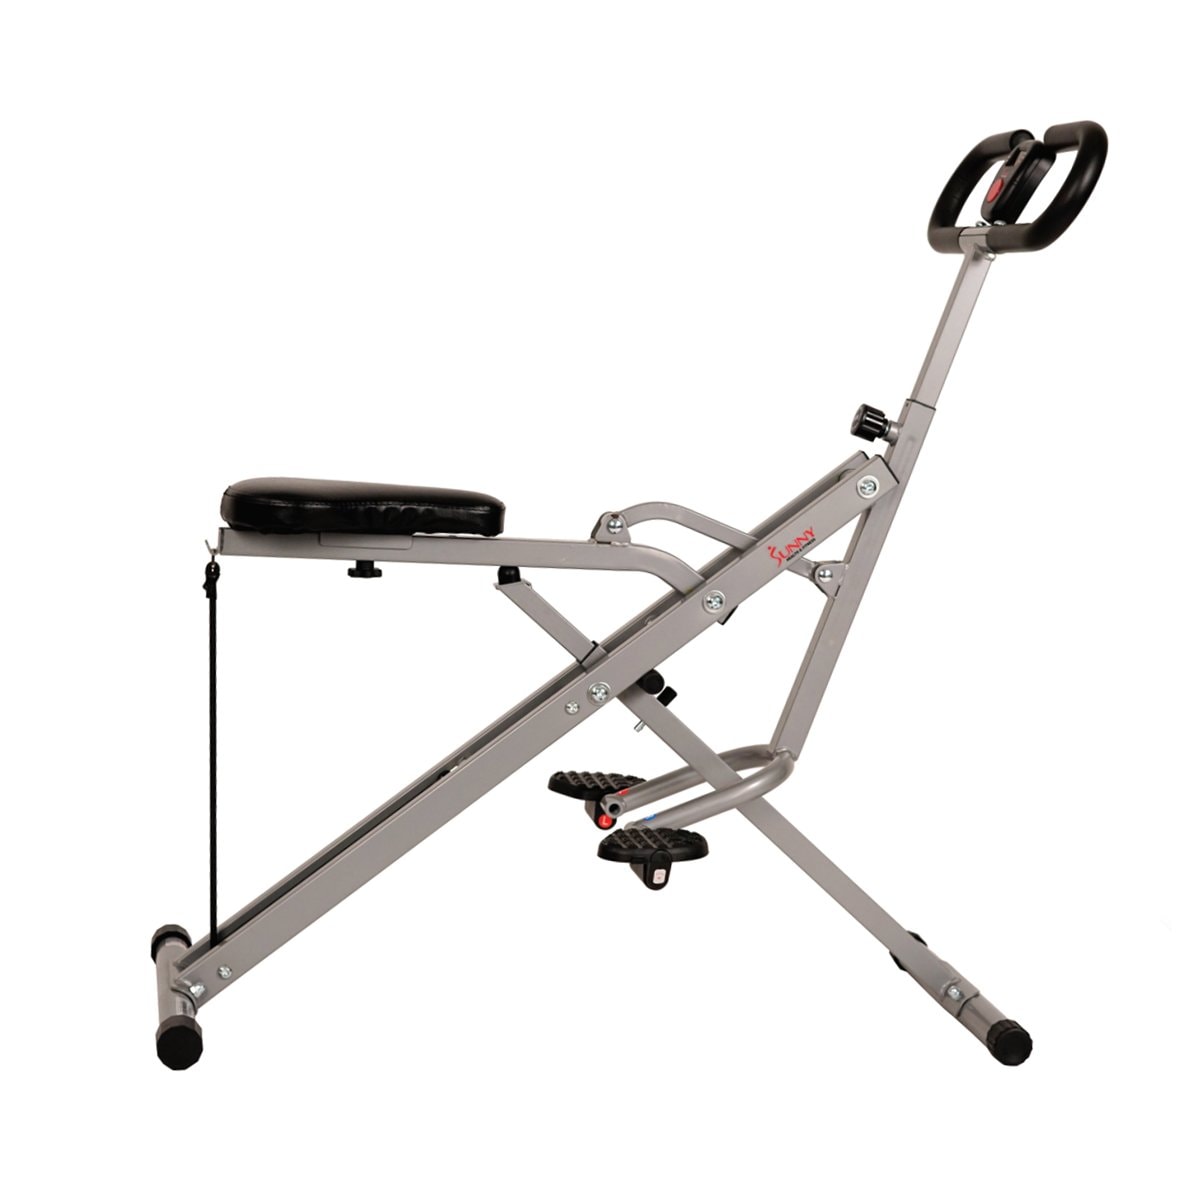 Sunny Health & Fitness Upright Row-n-Ride Exerciser